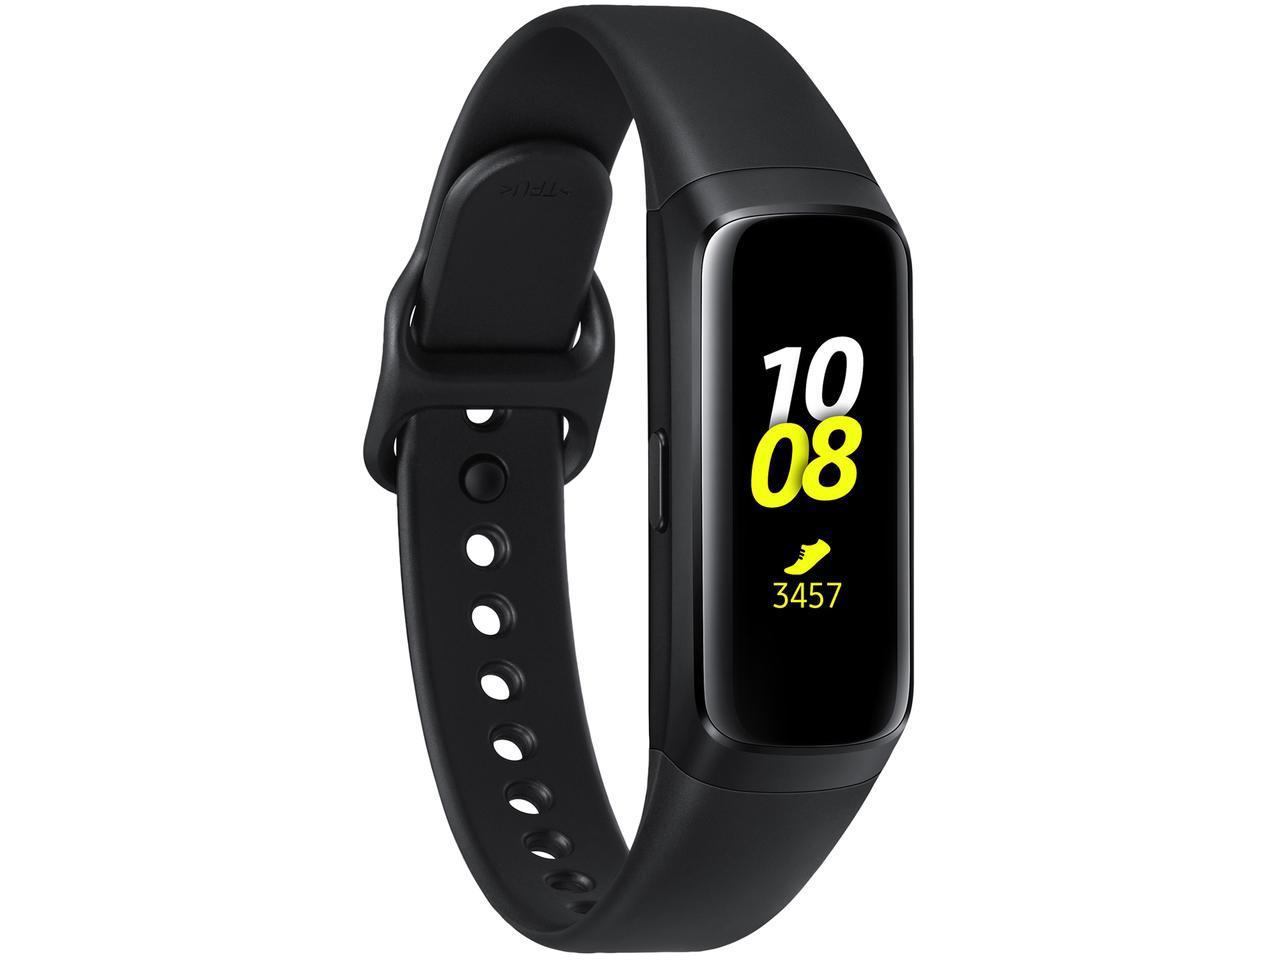 Samsung Galaxy Fit Full Specifications